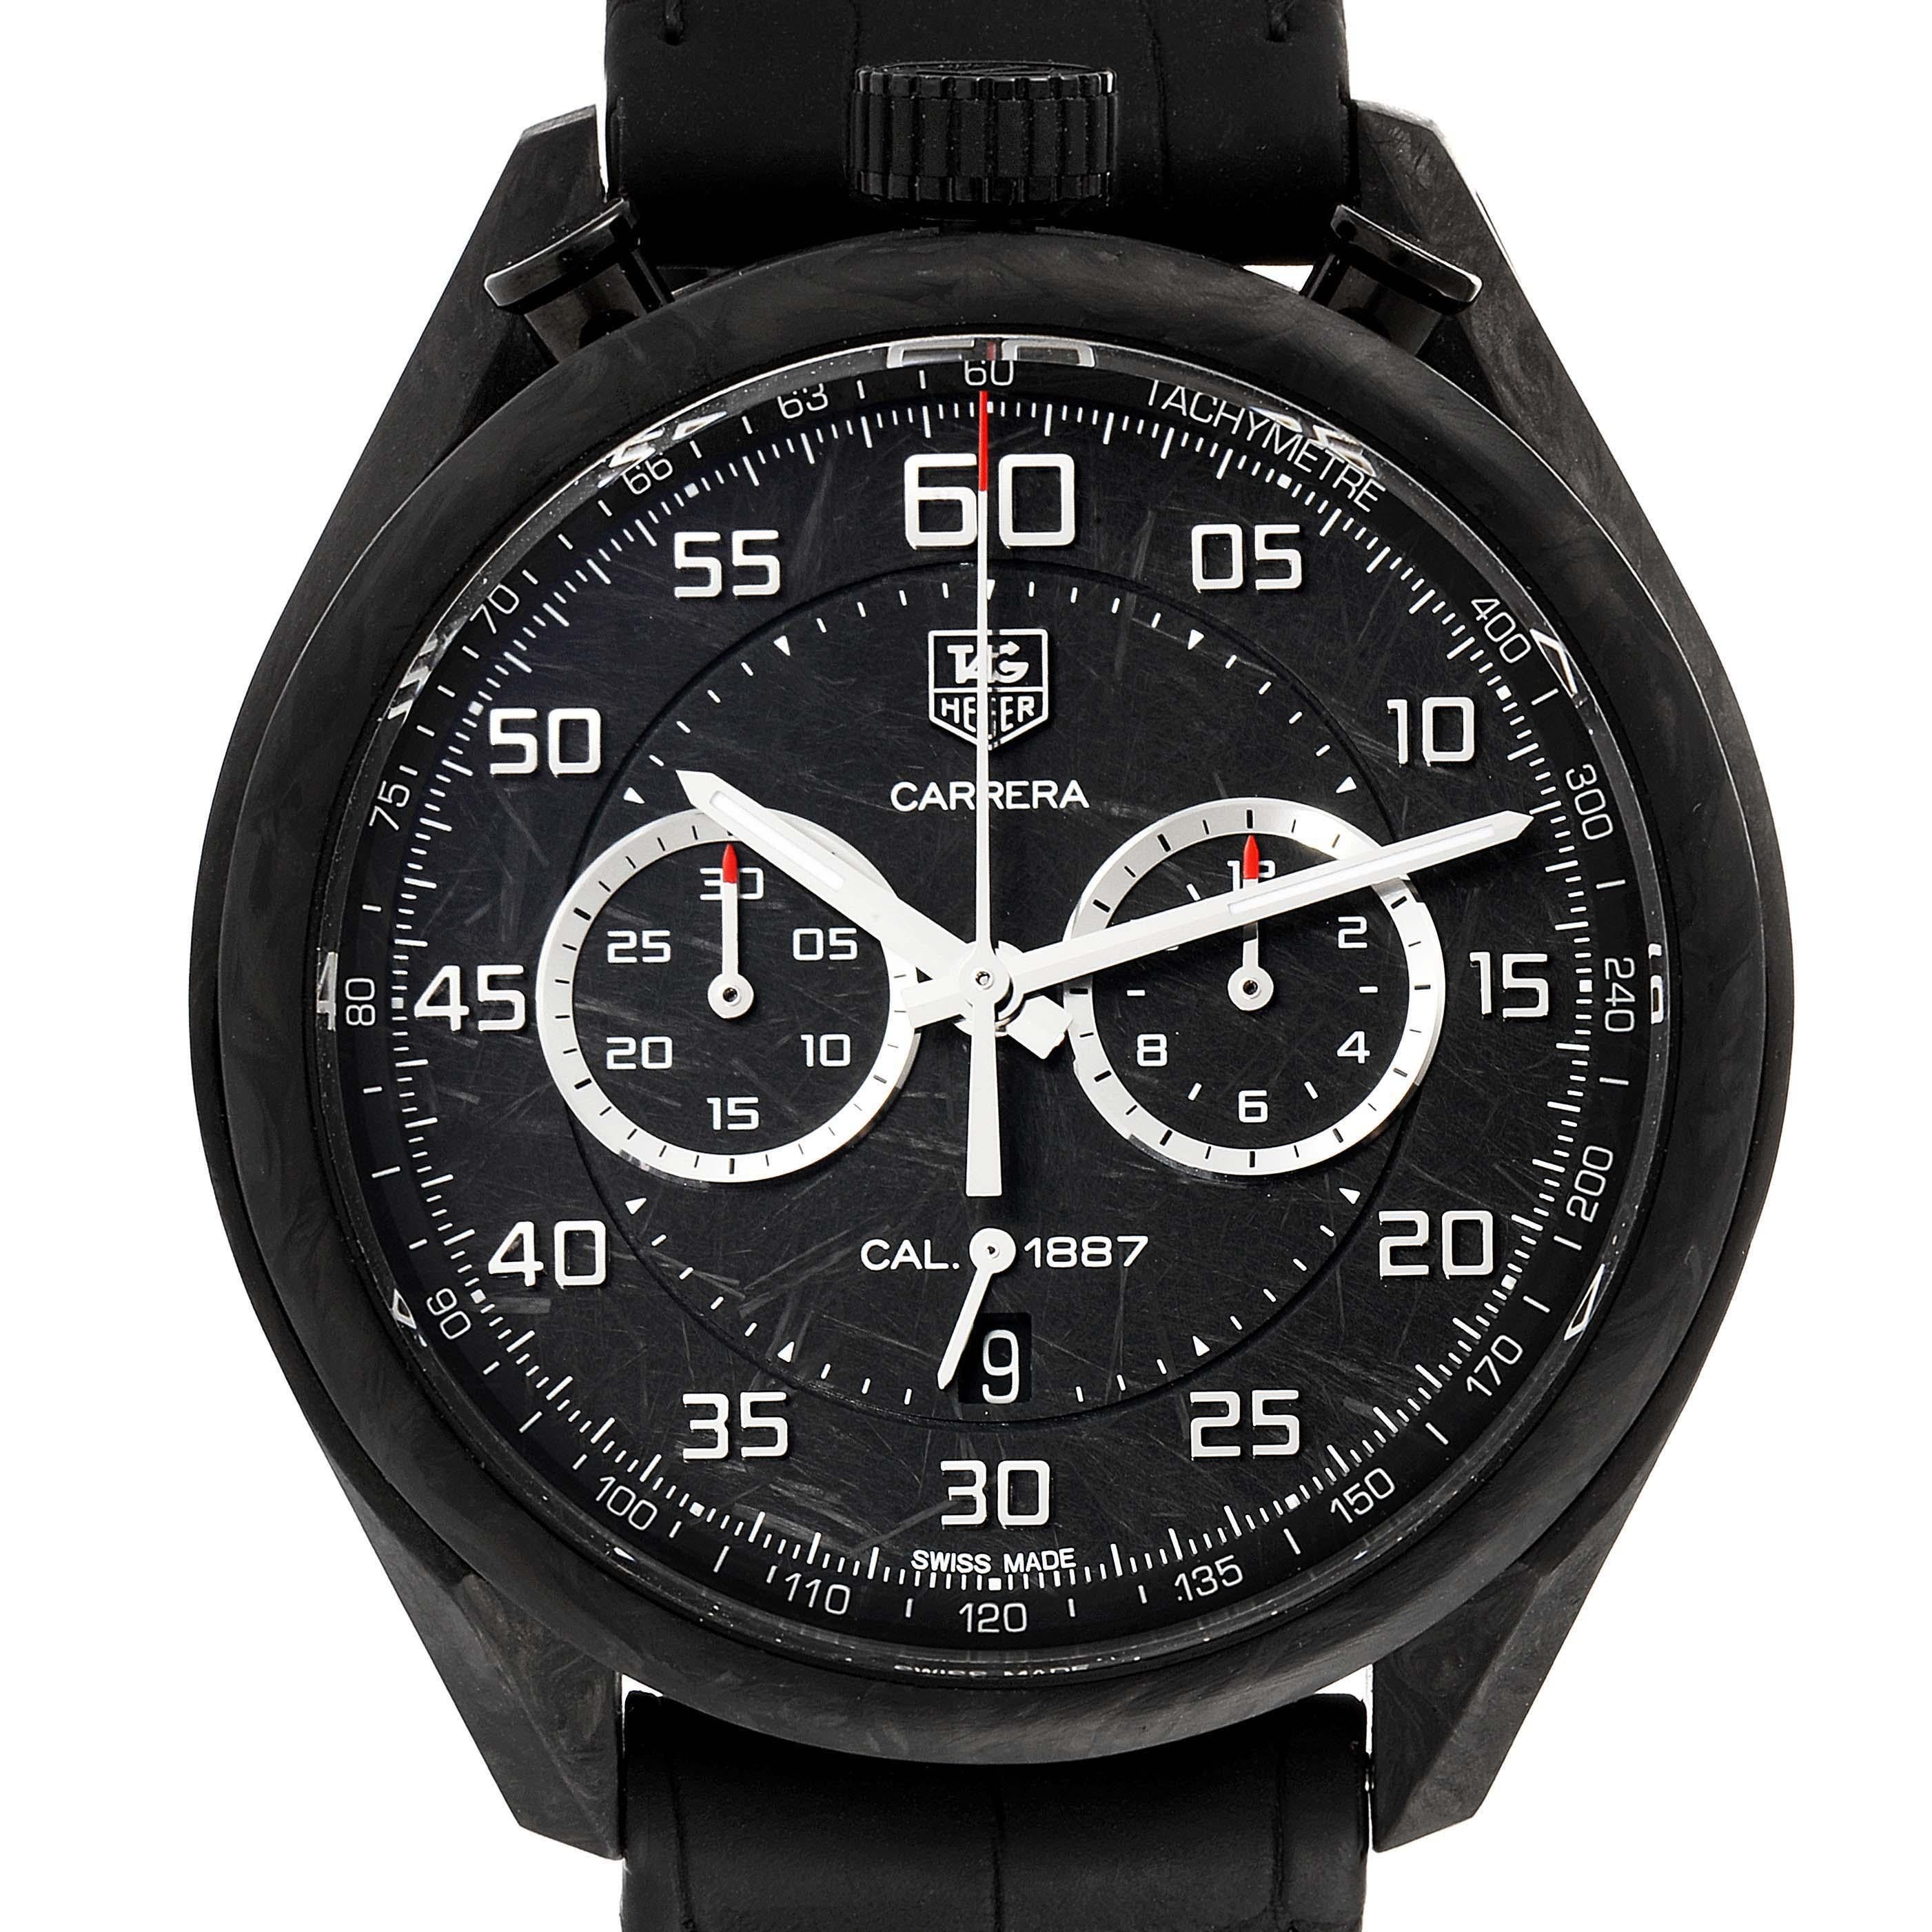 Tag Heuer Carrera Chronograph Grey Dial Carbon Mens Watch CAR2C90. Automatic self-winding chronograph movement. Black carbon matrix composite case 45 mm in diameter. Scratch-resistant smoked sapphire crystal exhibition caseback. Black carbon smooth